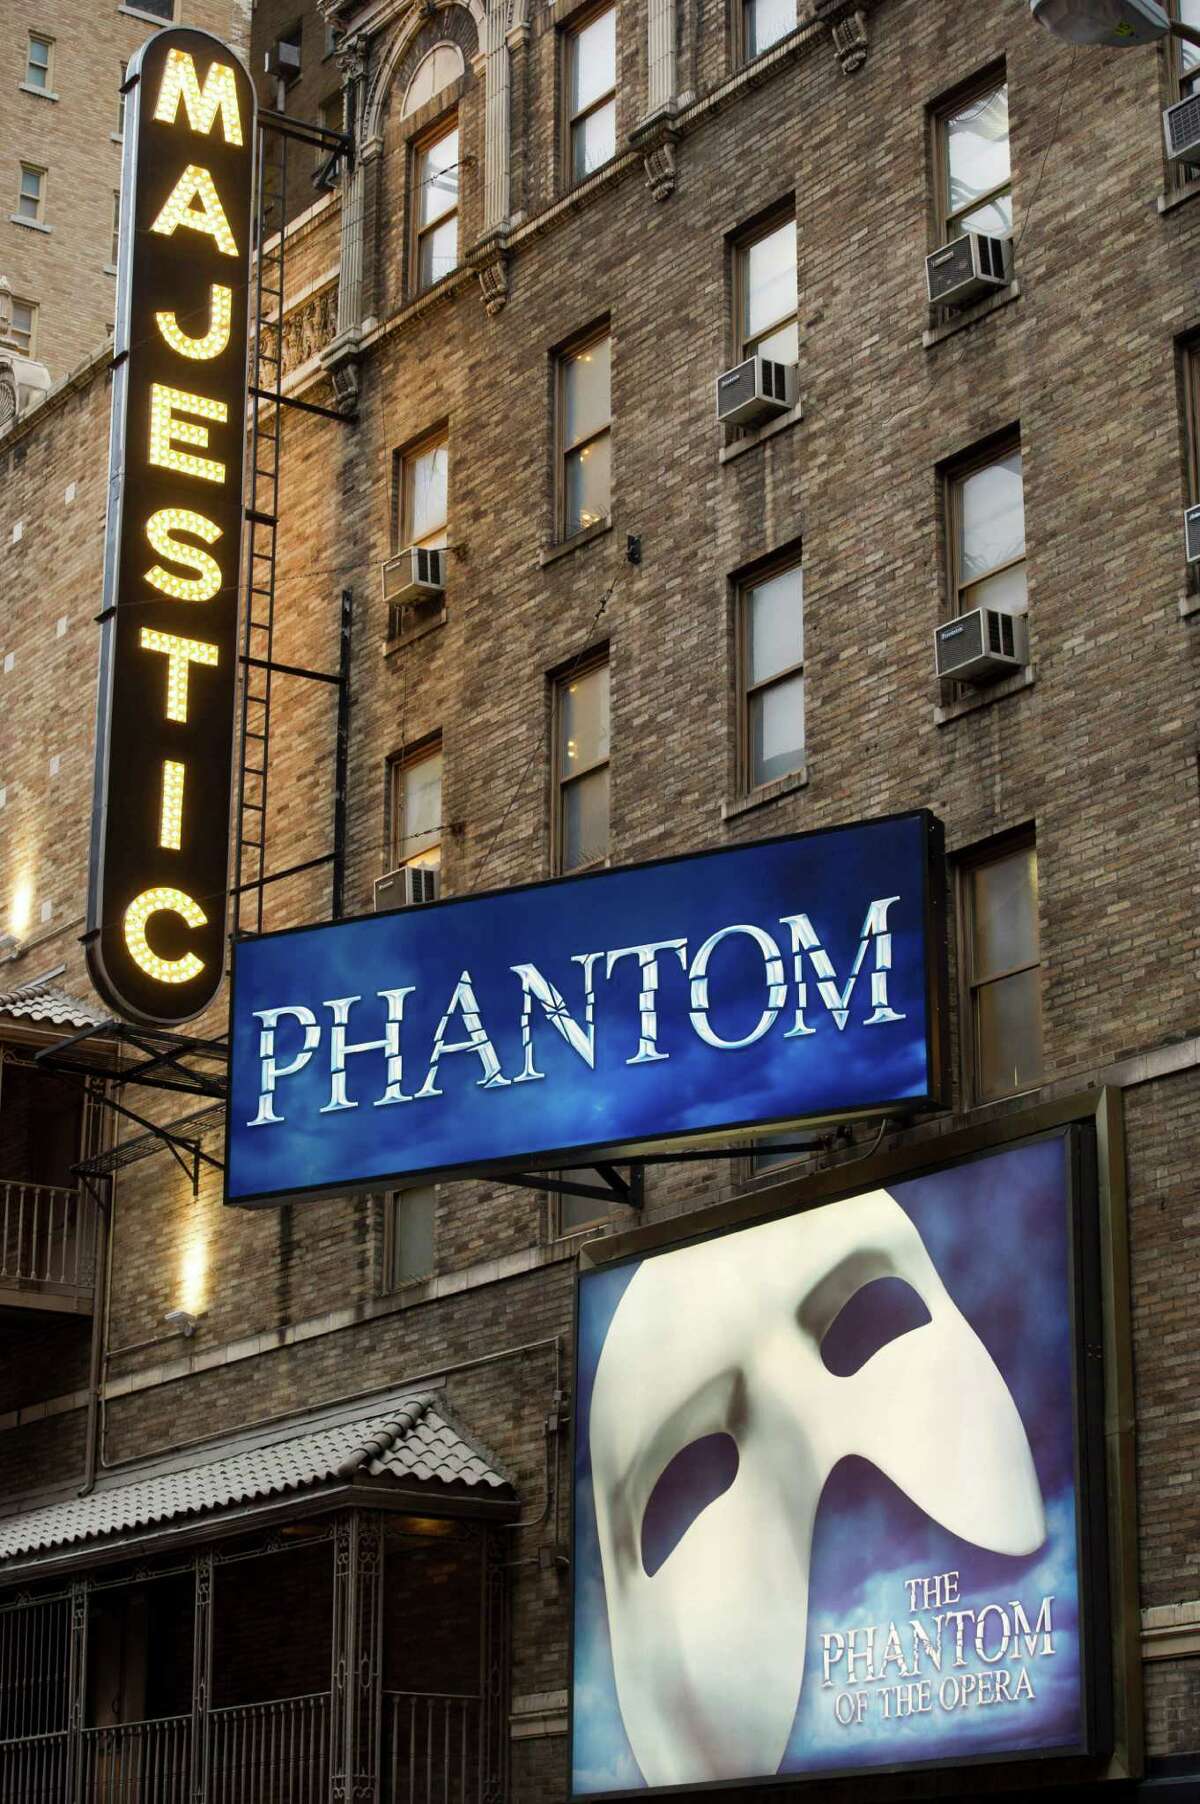 FILE - In this Jan. 19, 2012 file photo, the Majestic Theatre and the marquee for "The Phantom of the Opera" are seen in New York. Box office revenues show that "The Lion King" has recently swiped the title of Broadway's all-time highest grossing show from "The Phantom of the Opera." (AP Photo/Charles Sykes, File)